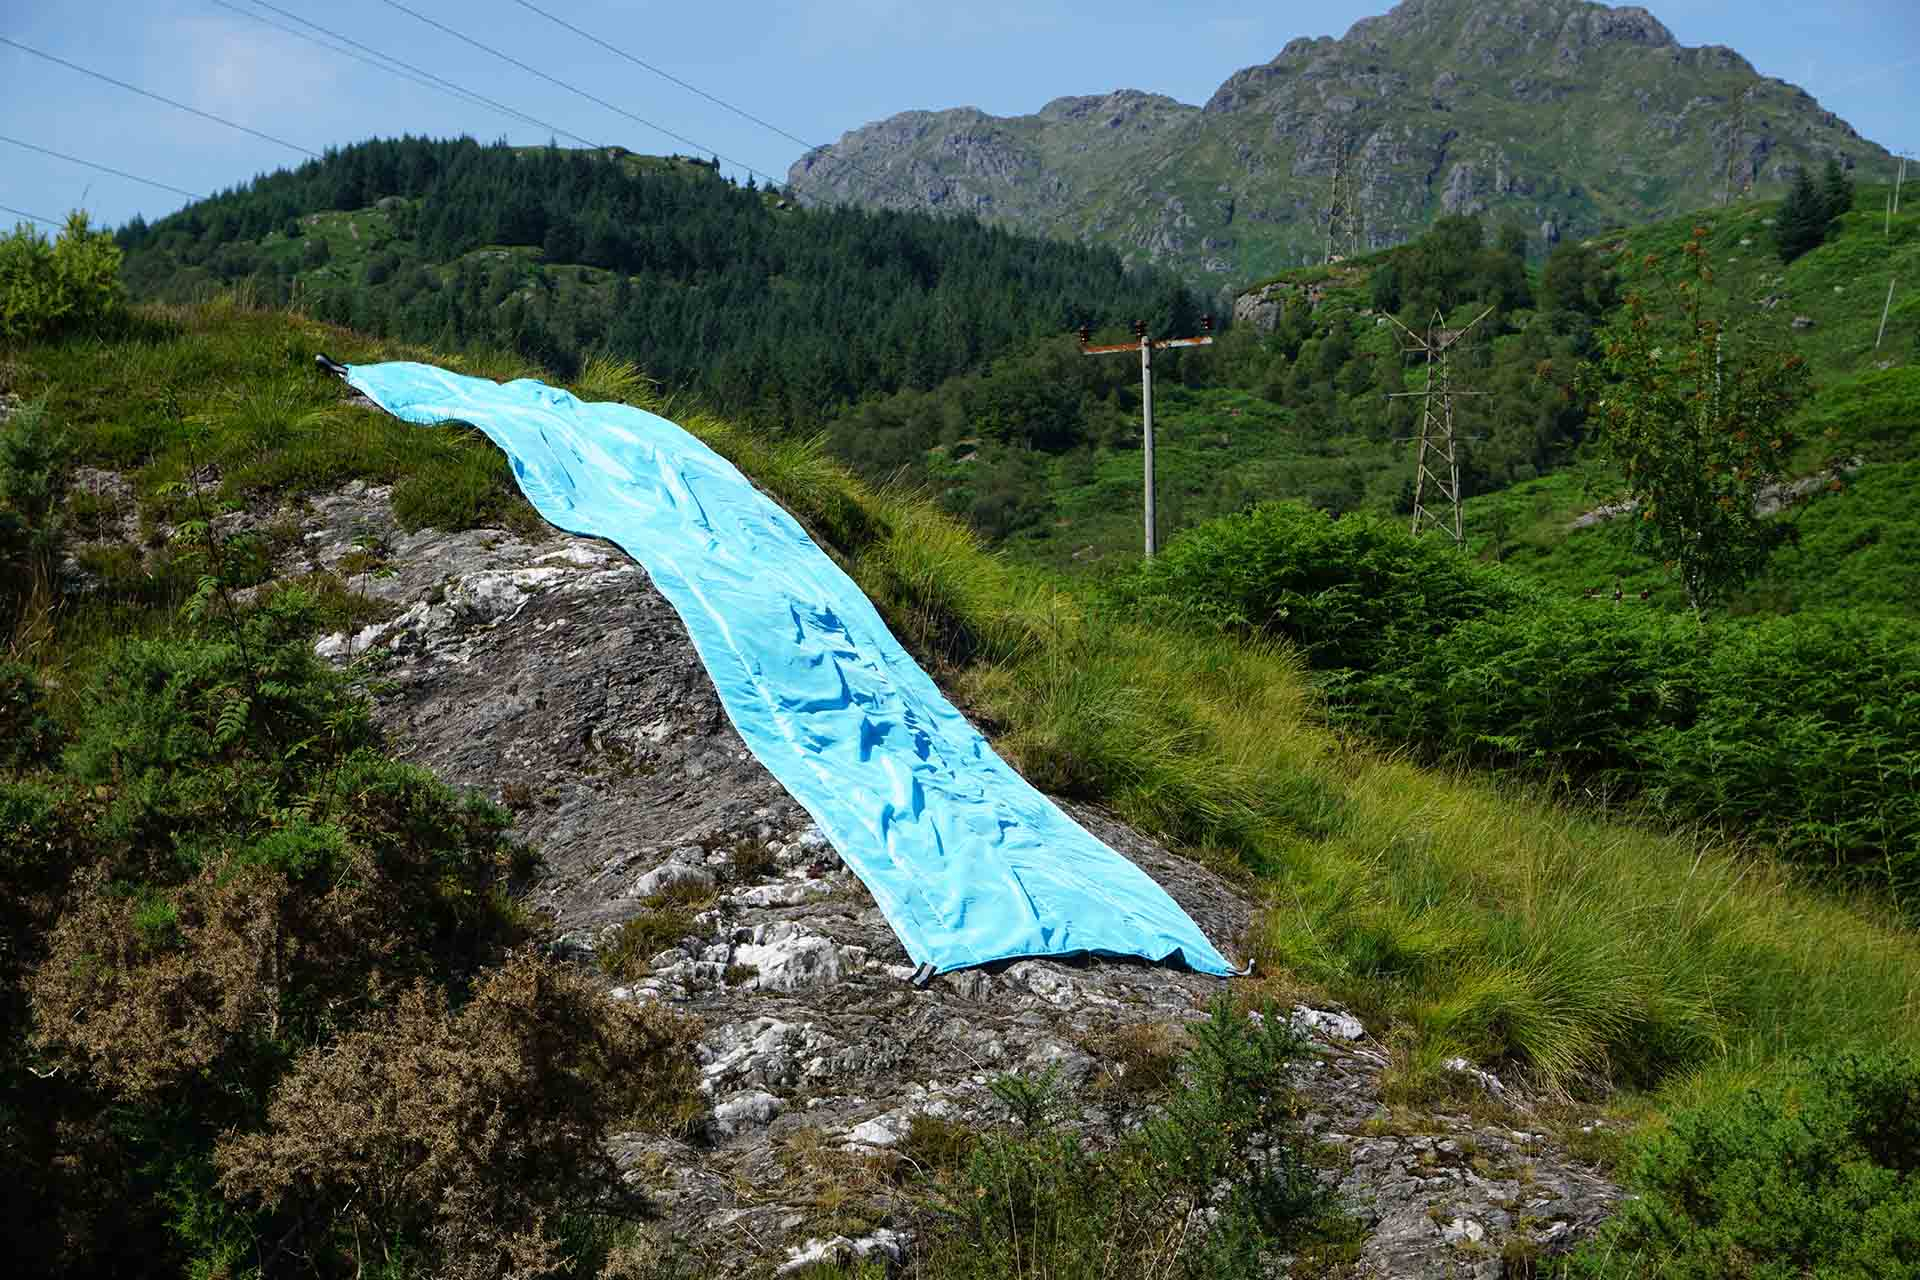 Baby Blue two toned taffeta stuffed with pattern sewn onto it draped over the topography of Arrochar. The fabric cascades down a large grey rock face and looks like water